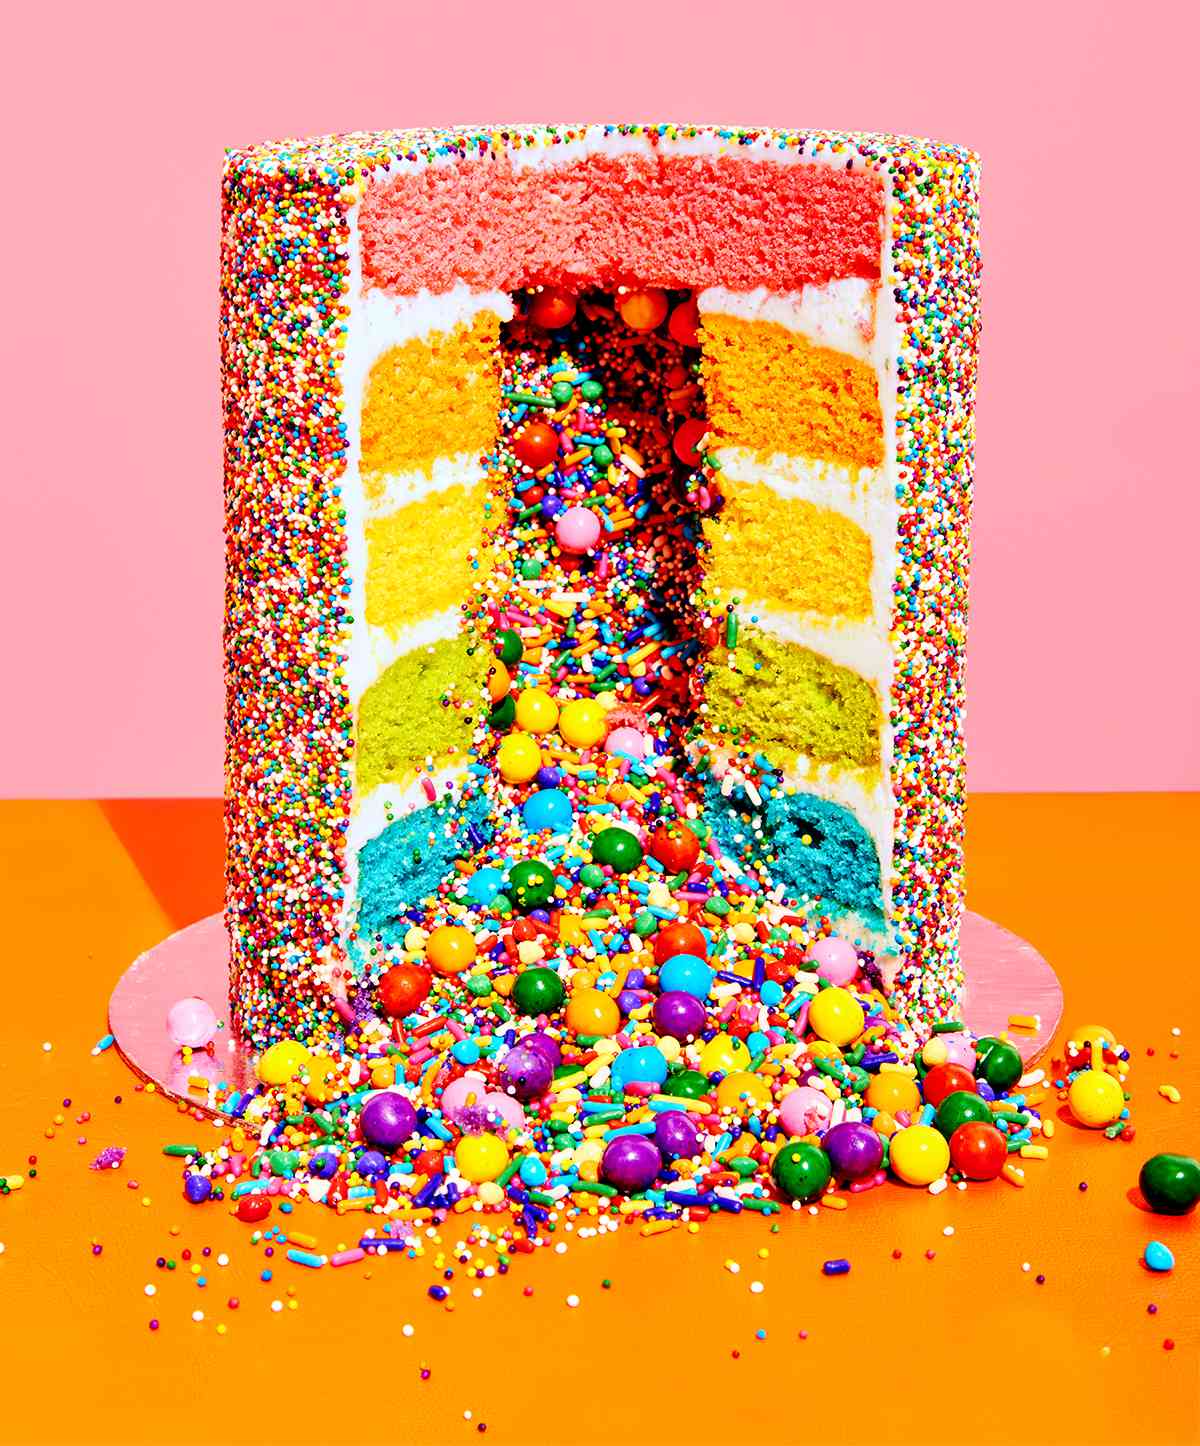 FOOD TREND: The 'Explosion' Cake&nbsp;